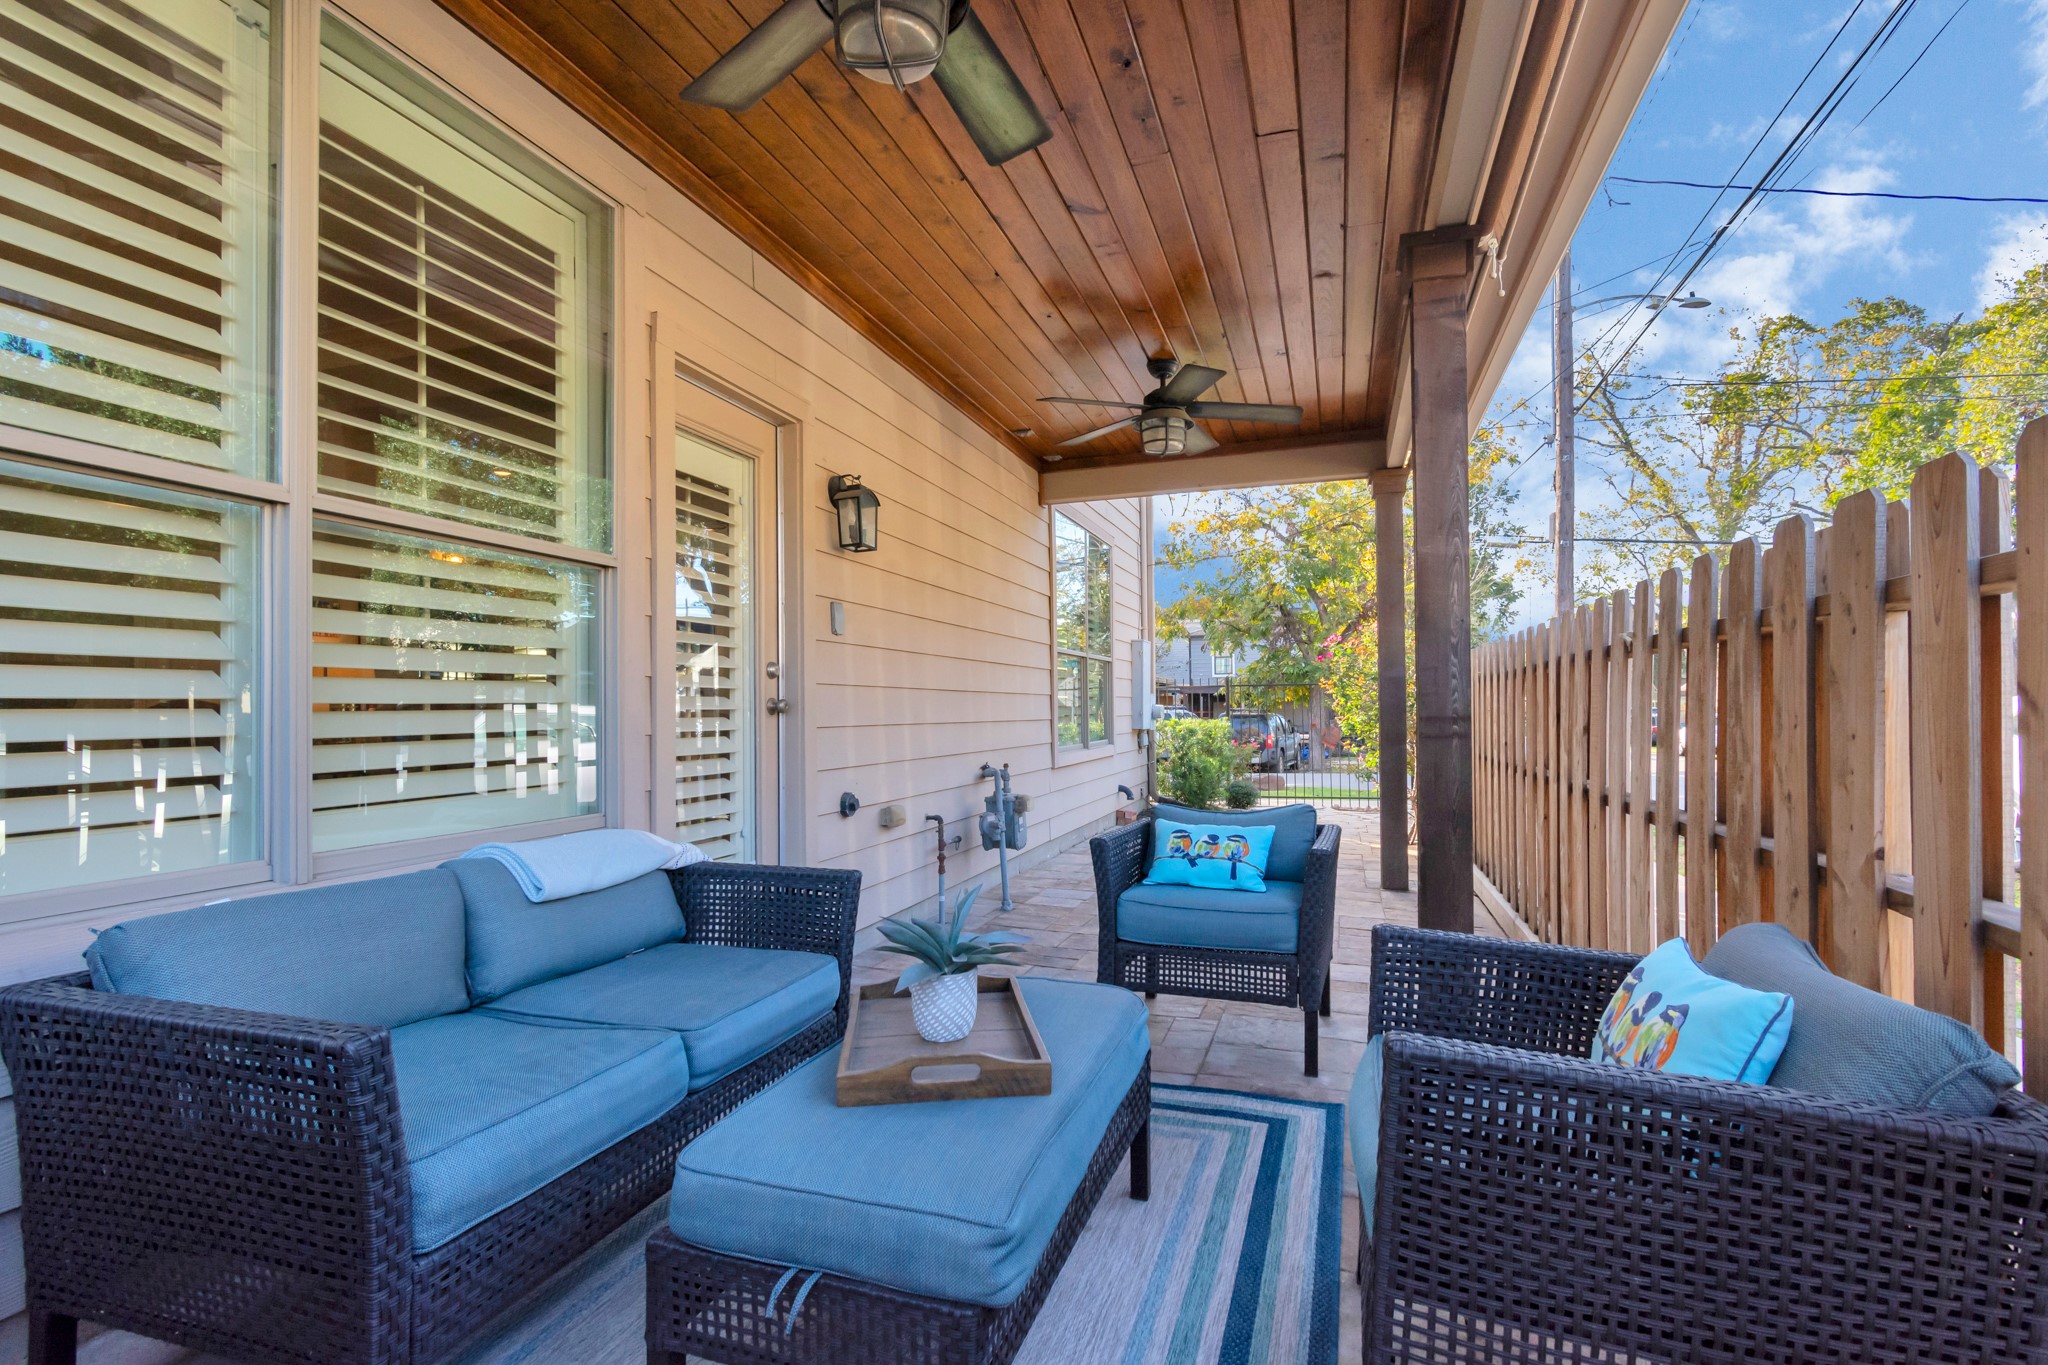 Step outside and immerse yourself in the this captivating side yard space.